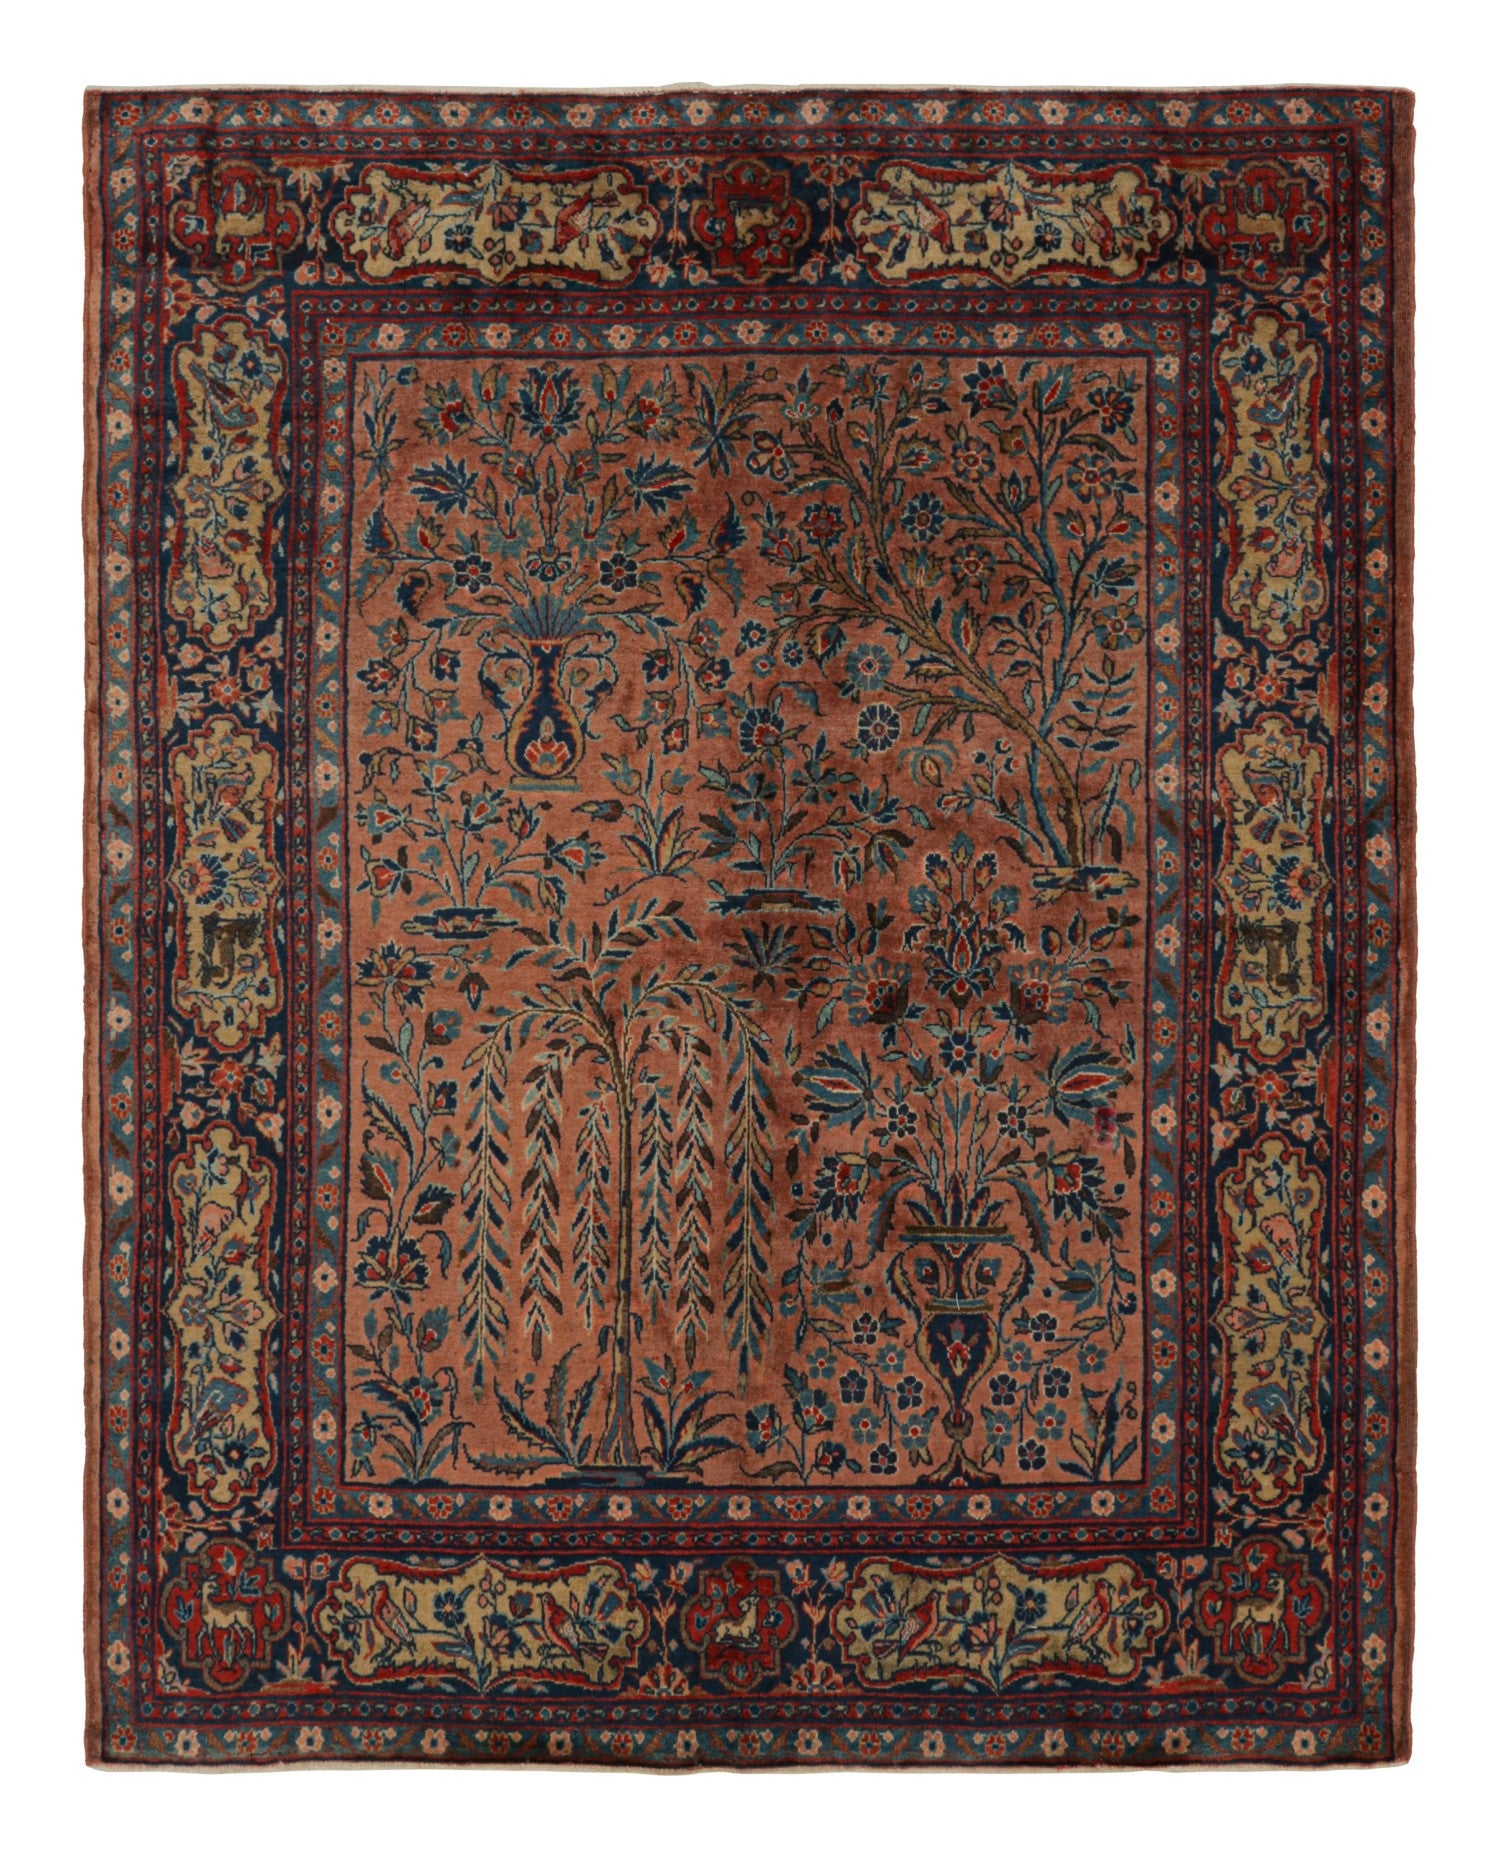 Antique Persian Kashan rug with Pictorial and Floral Patterns, from Rug & Kilim 